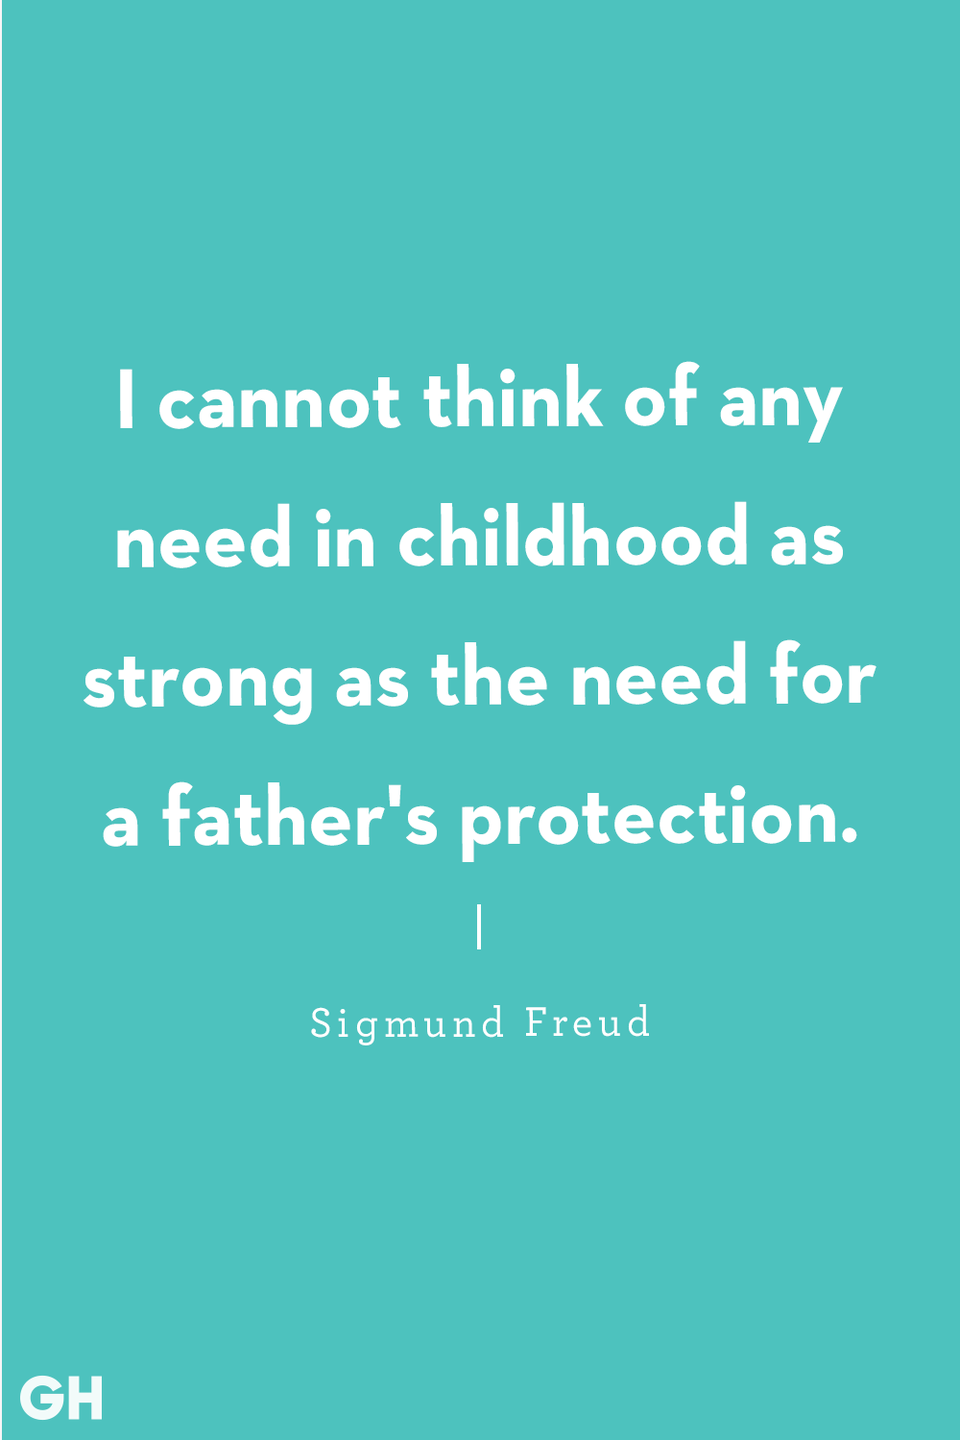 <p>"I cannot think of any need in childhood as strong as the need for a father's protection."</p>